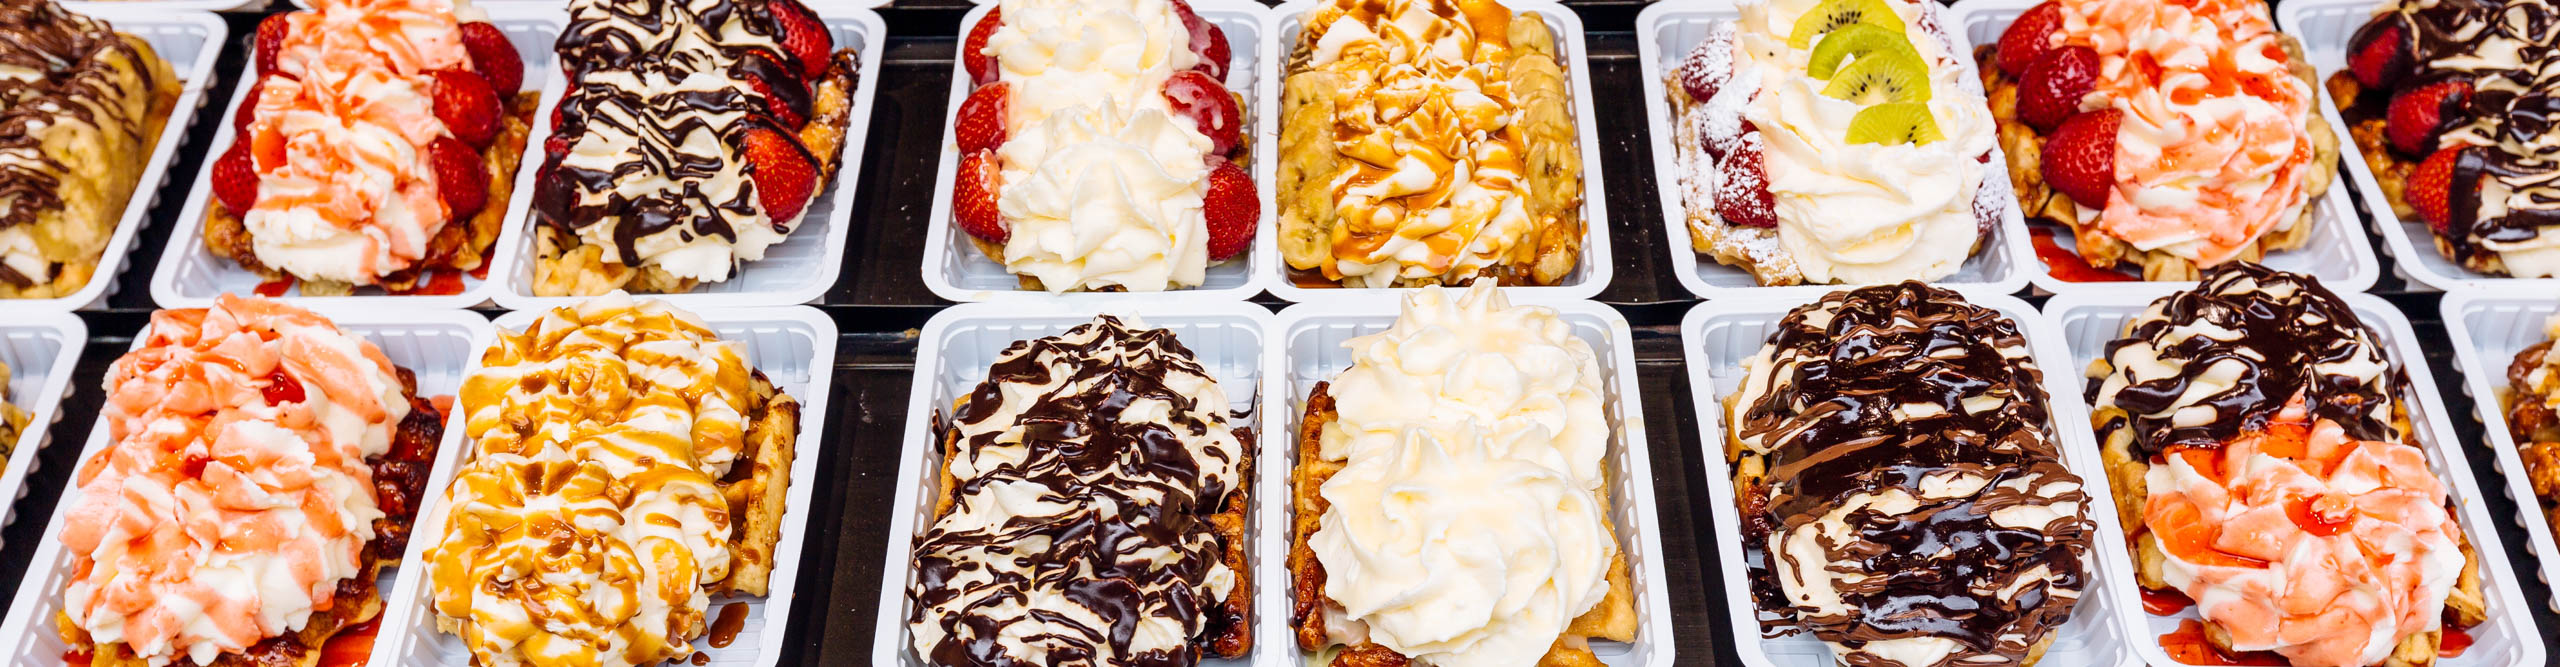 Belgian waffles with various sweet toppings for sale, Brussels, Belgium